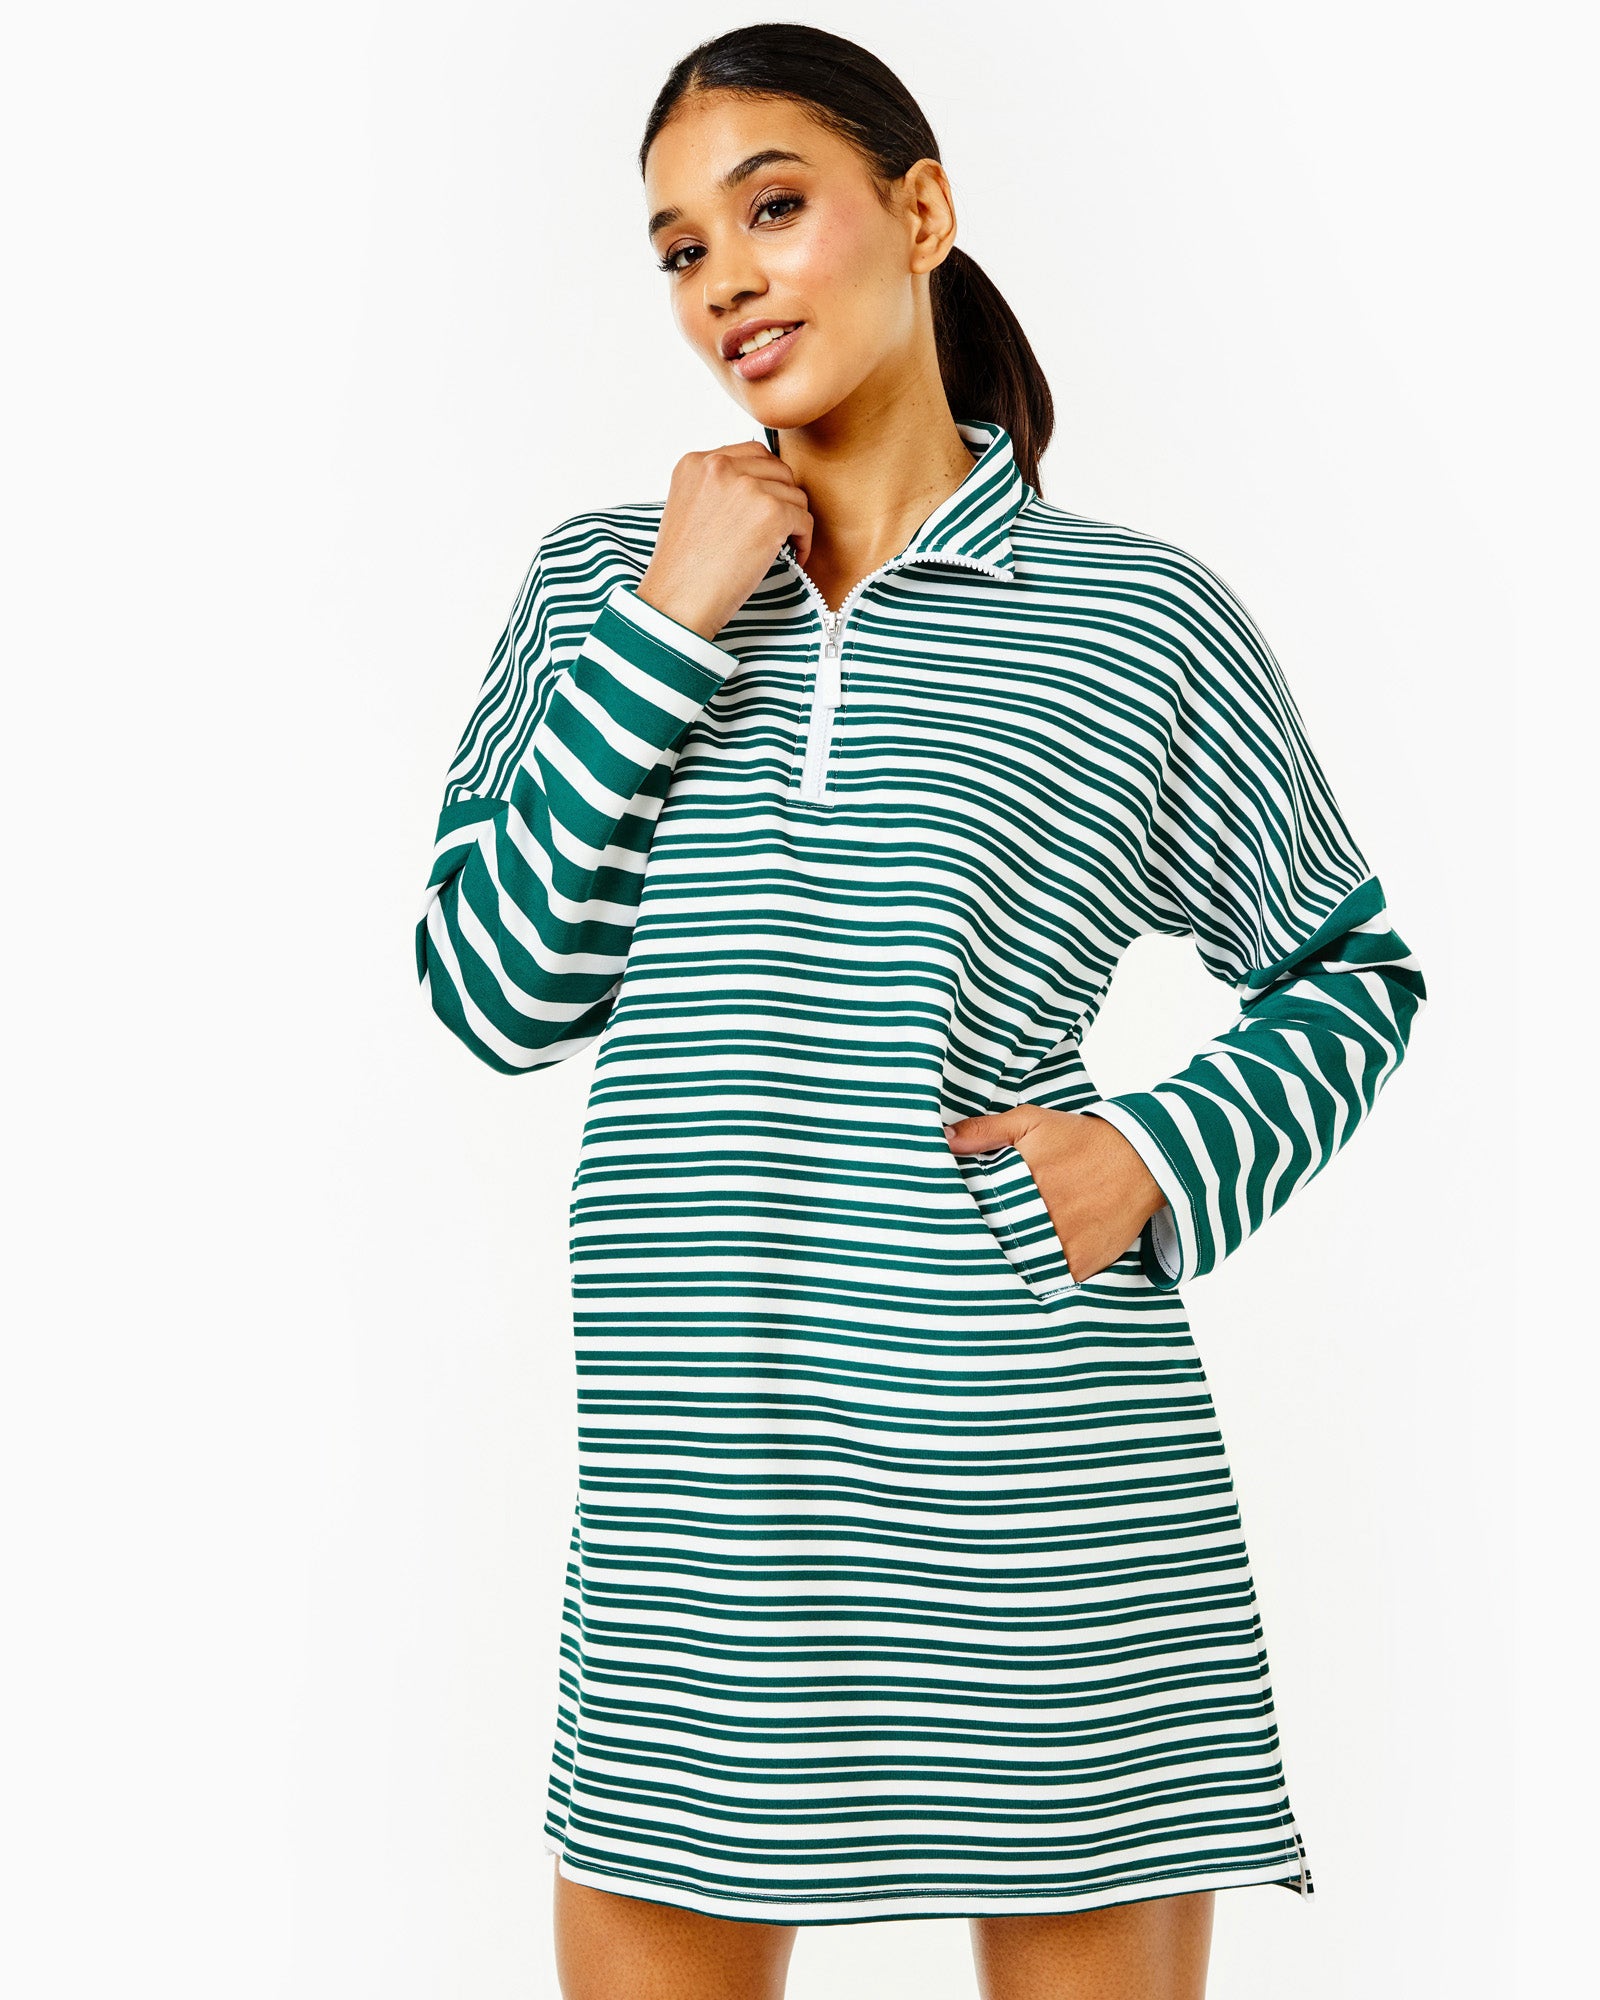 My Favorite Sweater Dresses. - The Stripe by Grace Atwood